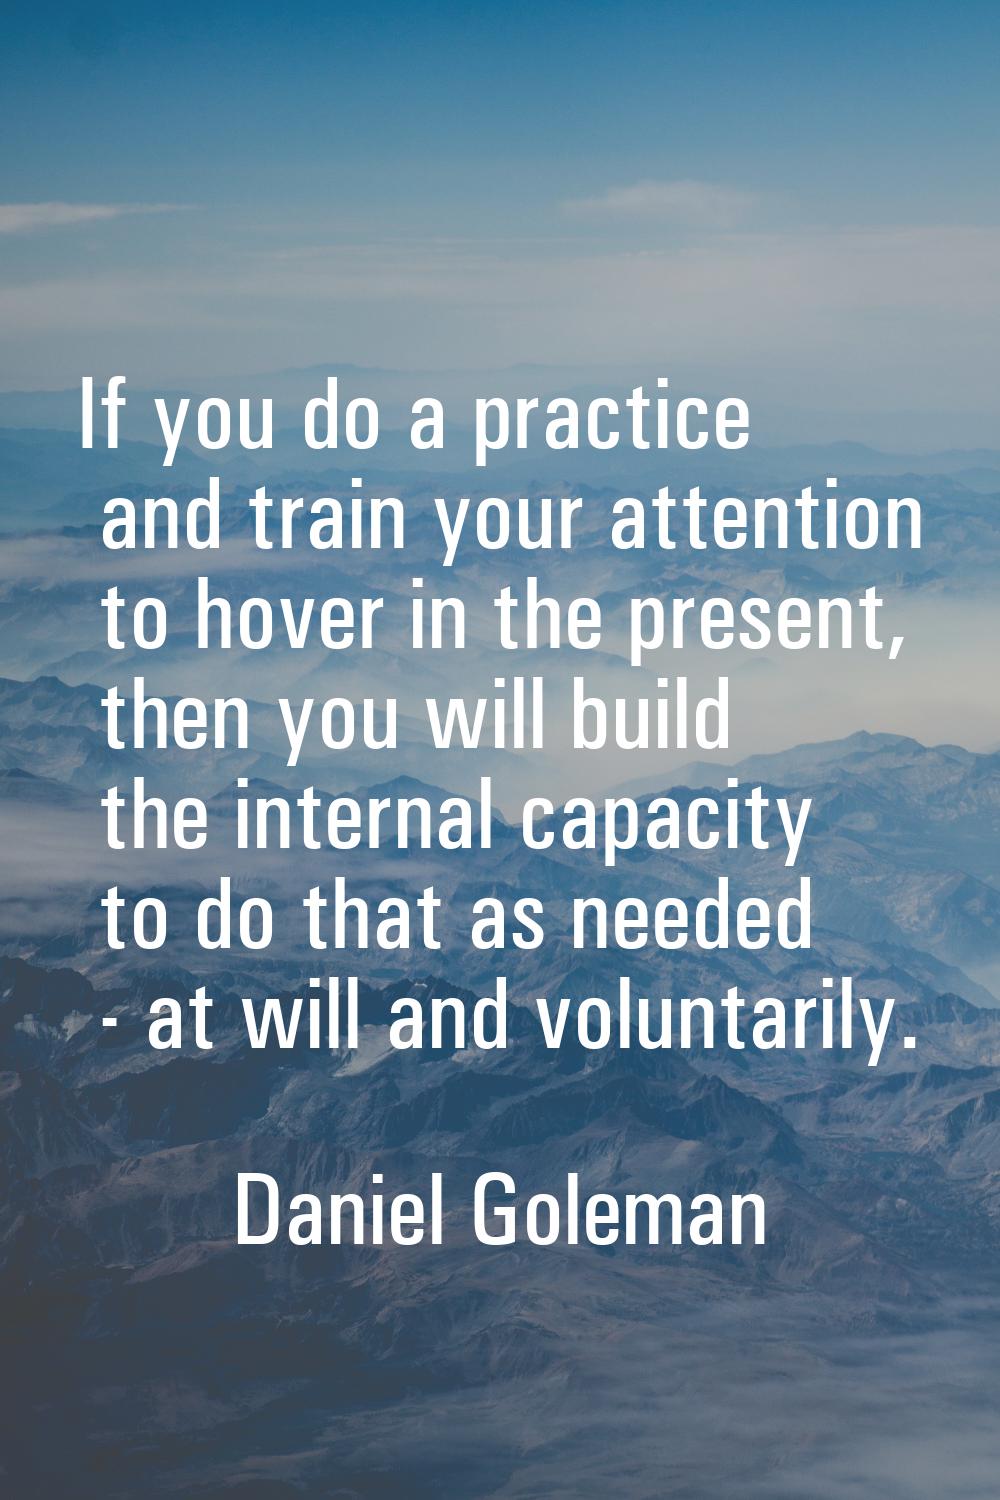 If you do a practice and train your attention to hover in the present, then you will build the inte